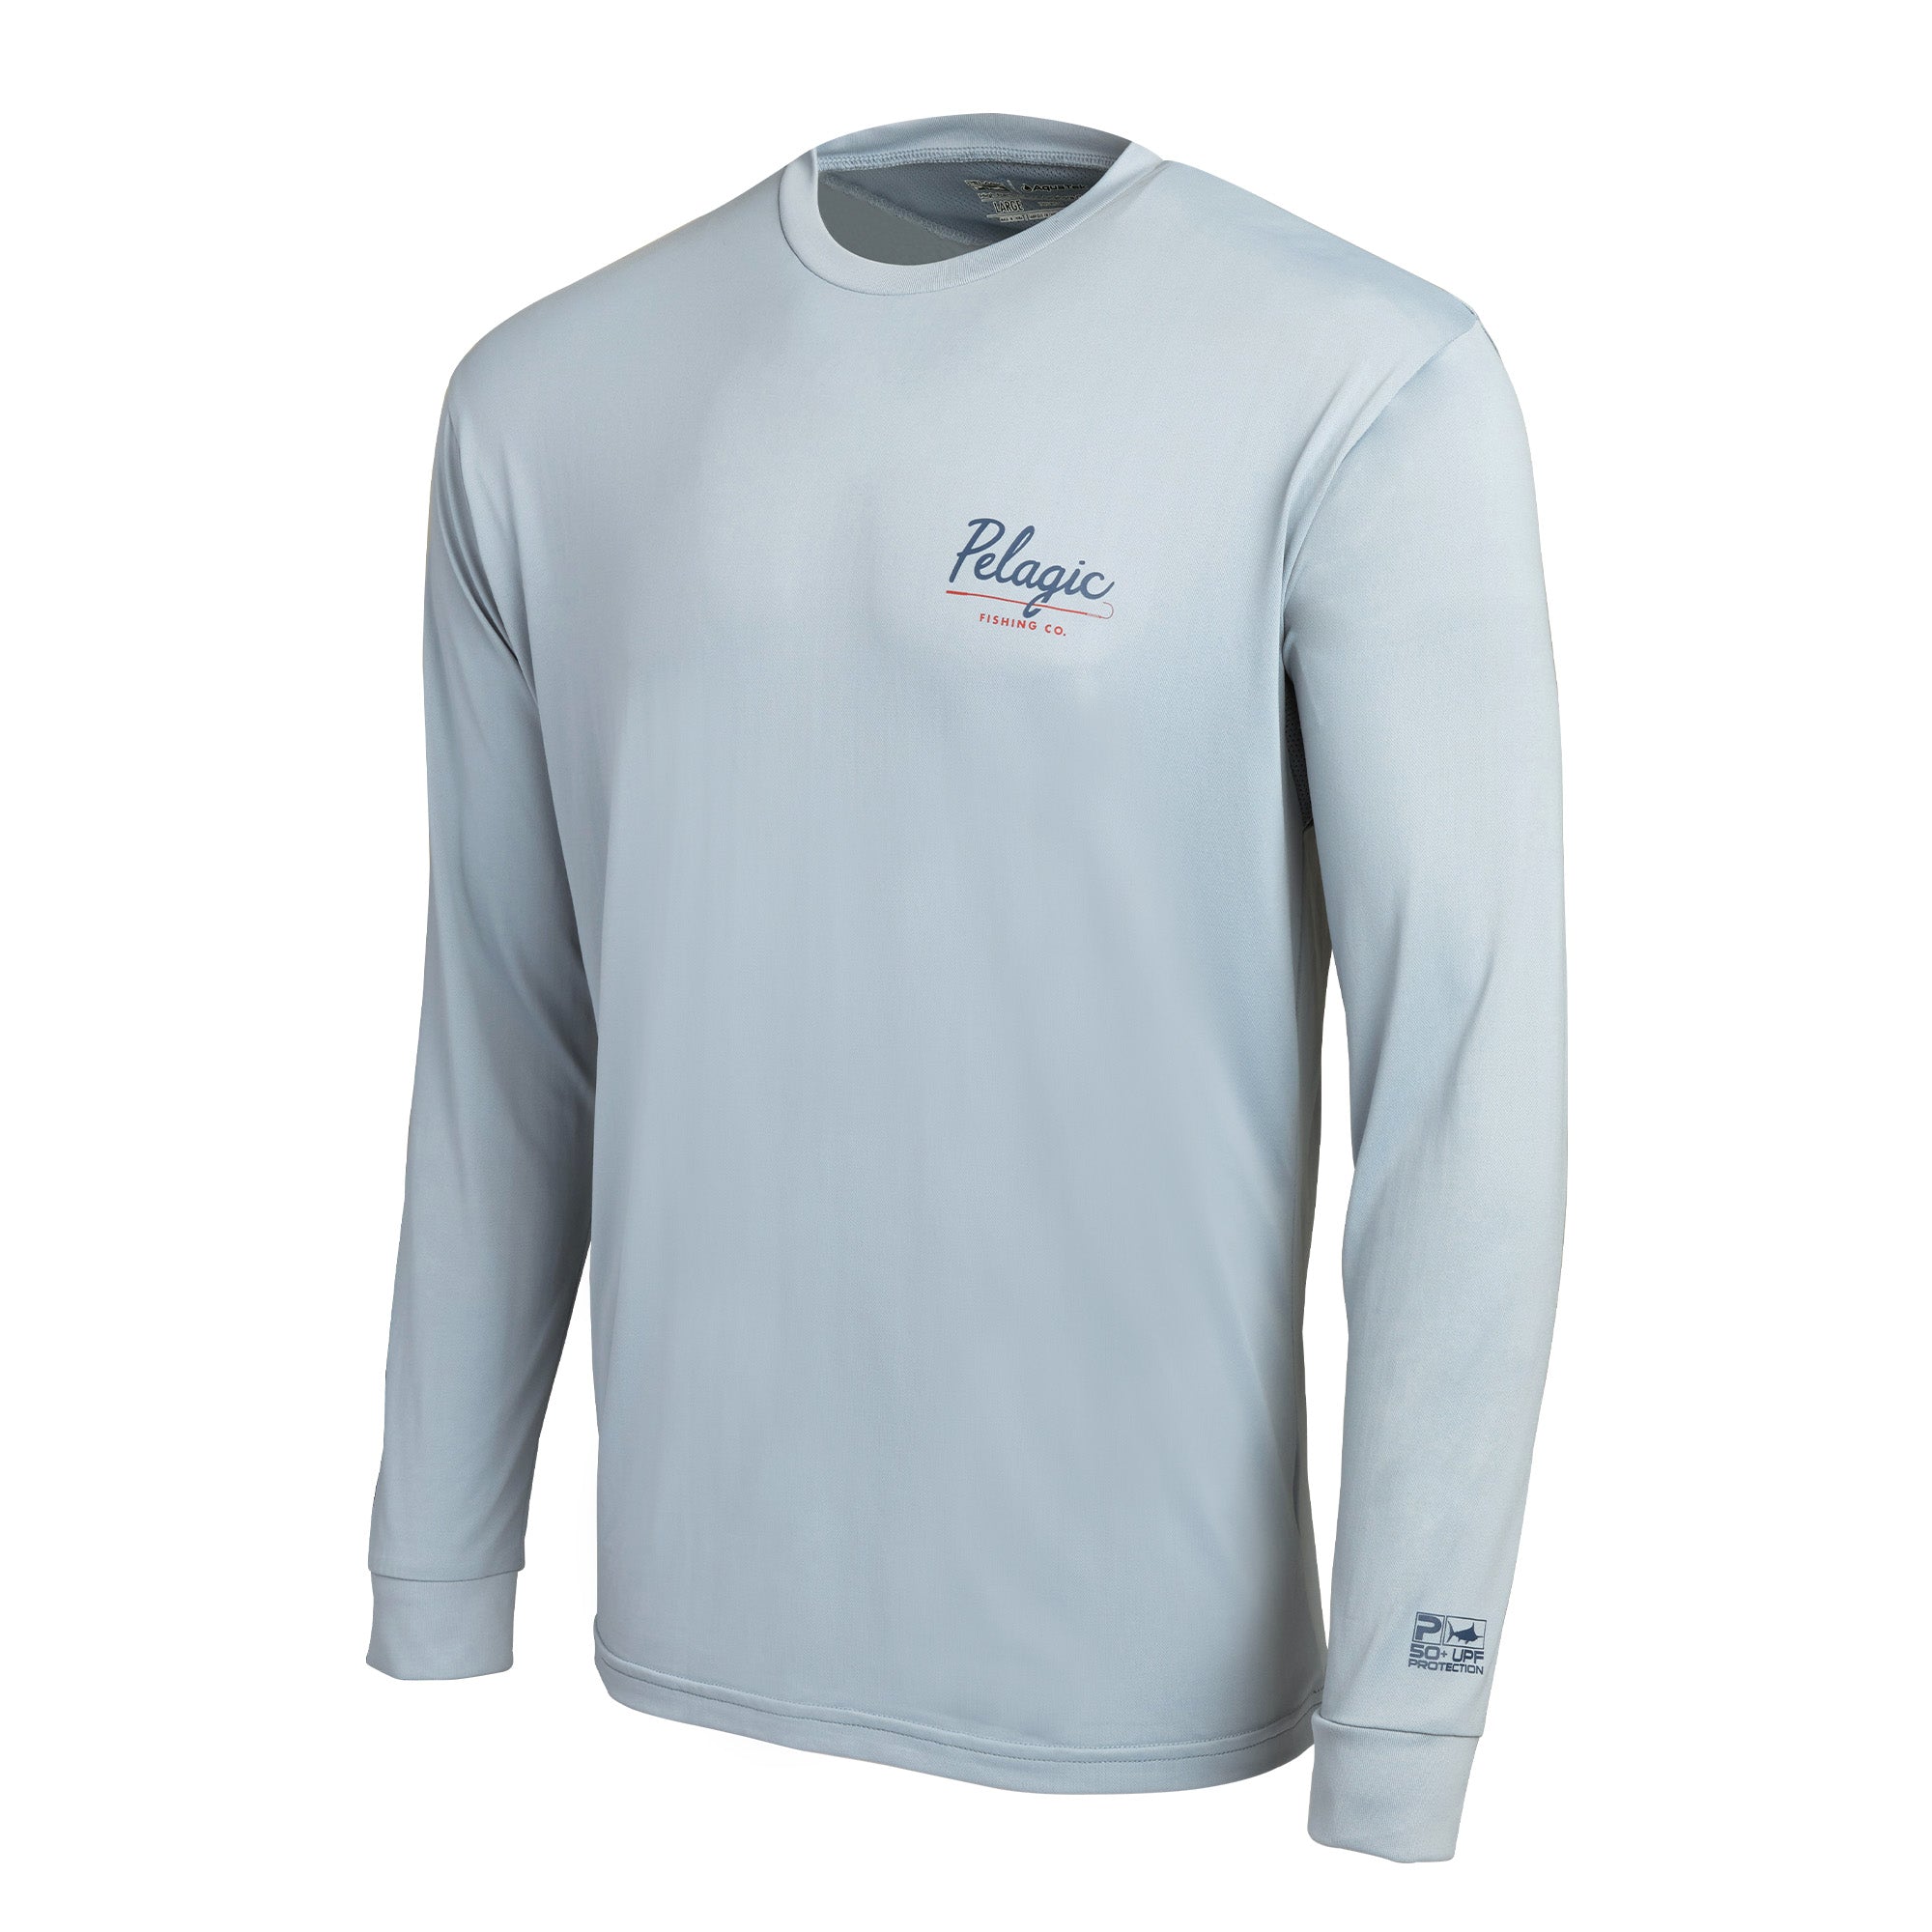 Long Sleeve Fishing T-Shirt for Men and Women, UPF 50 Dri-Fit Performance  Clothing - Southern Fin Apparel